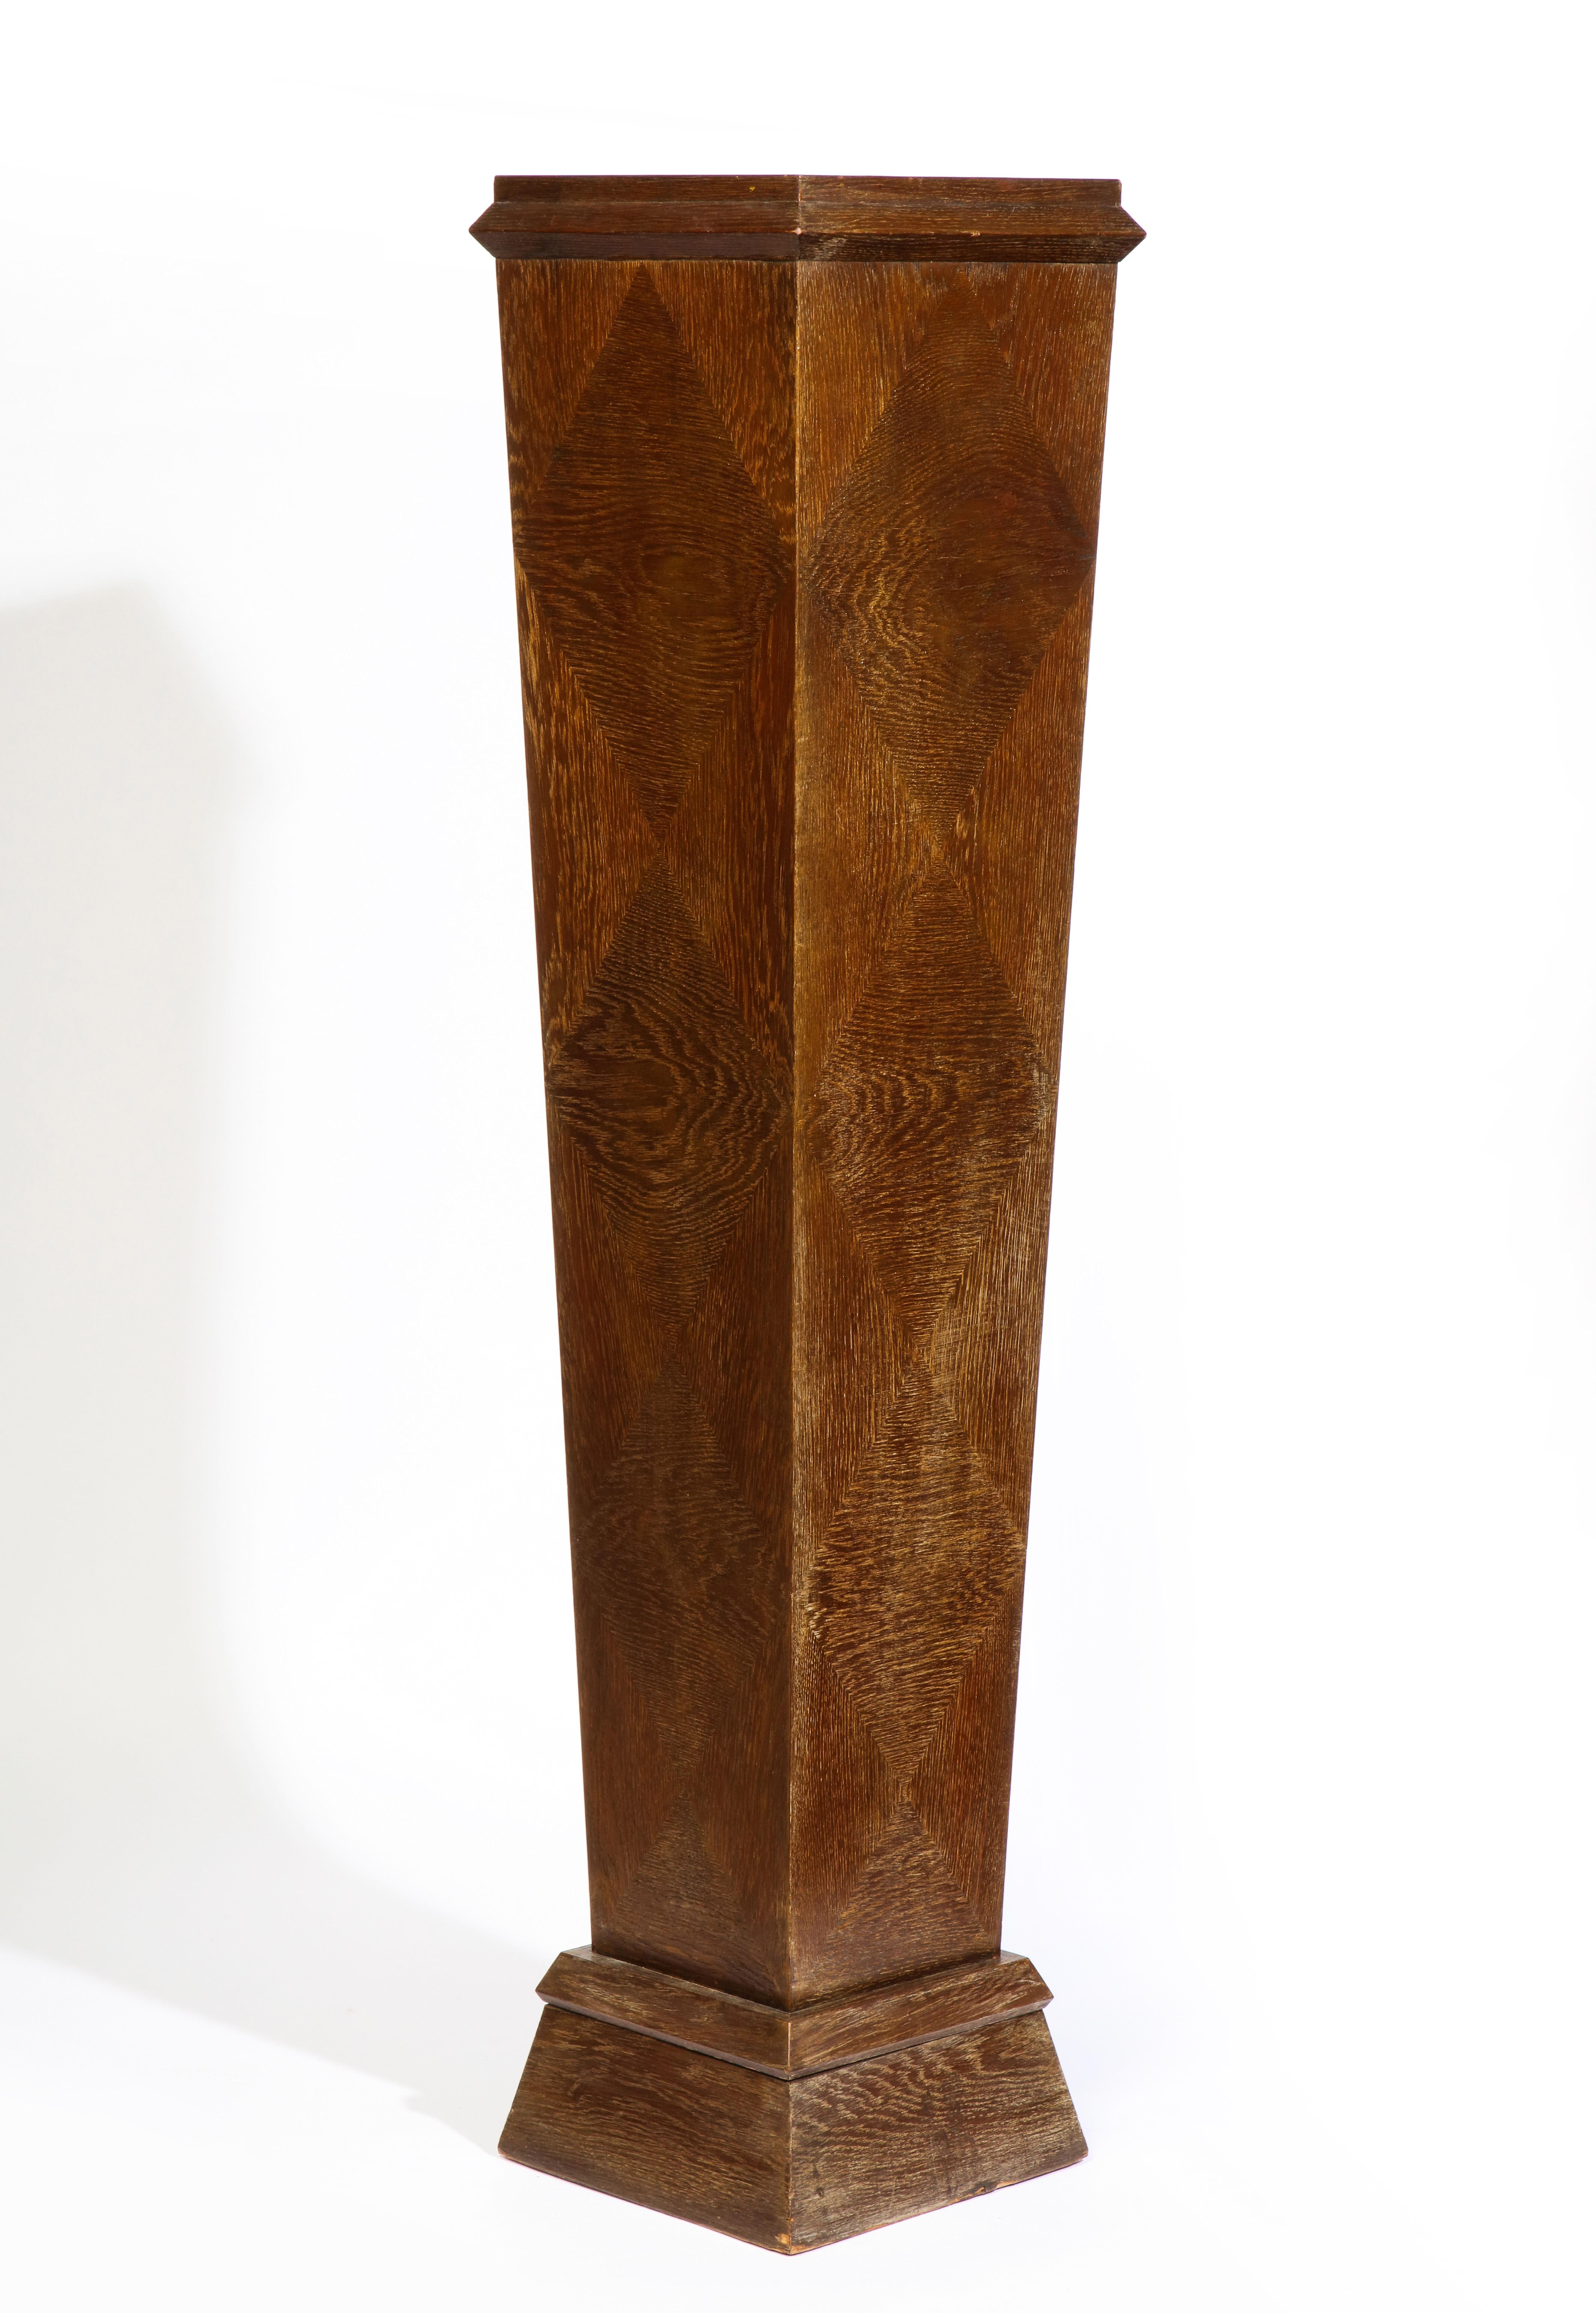 A modern French Art Moderne style cerused oak pedestal of square form.

The 'Art Moderne' style was conceived by designers who stripped Art Deco of its ornament in favor of a pure-line concept that allows for smooth, effortless design. Defined by